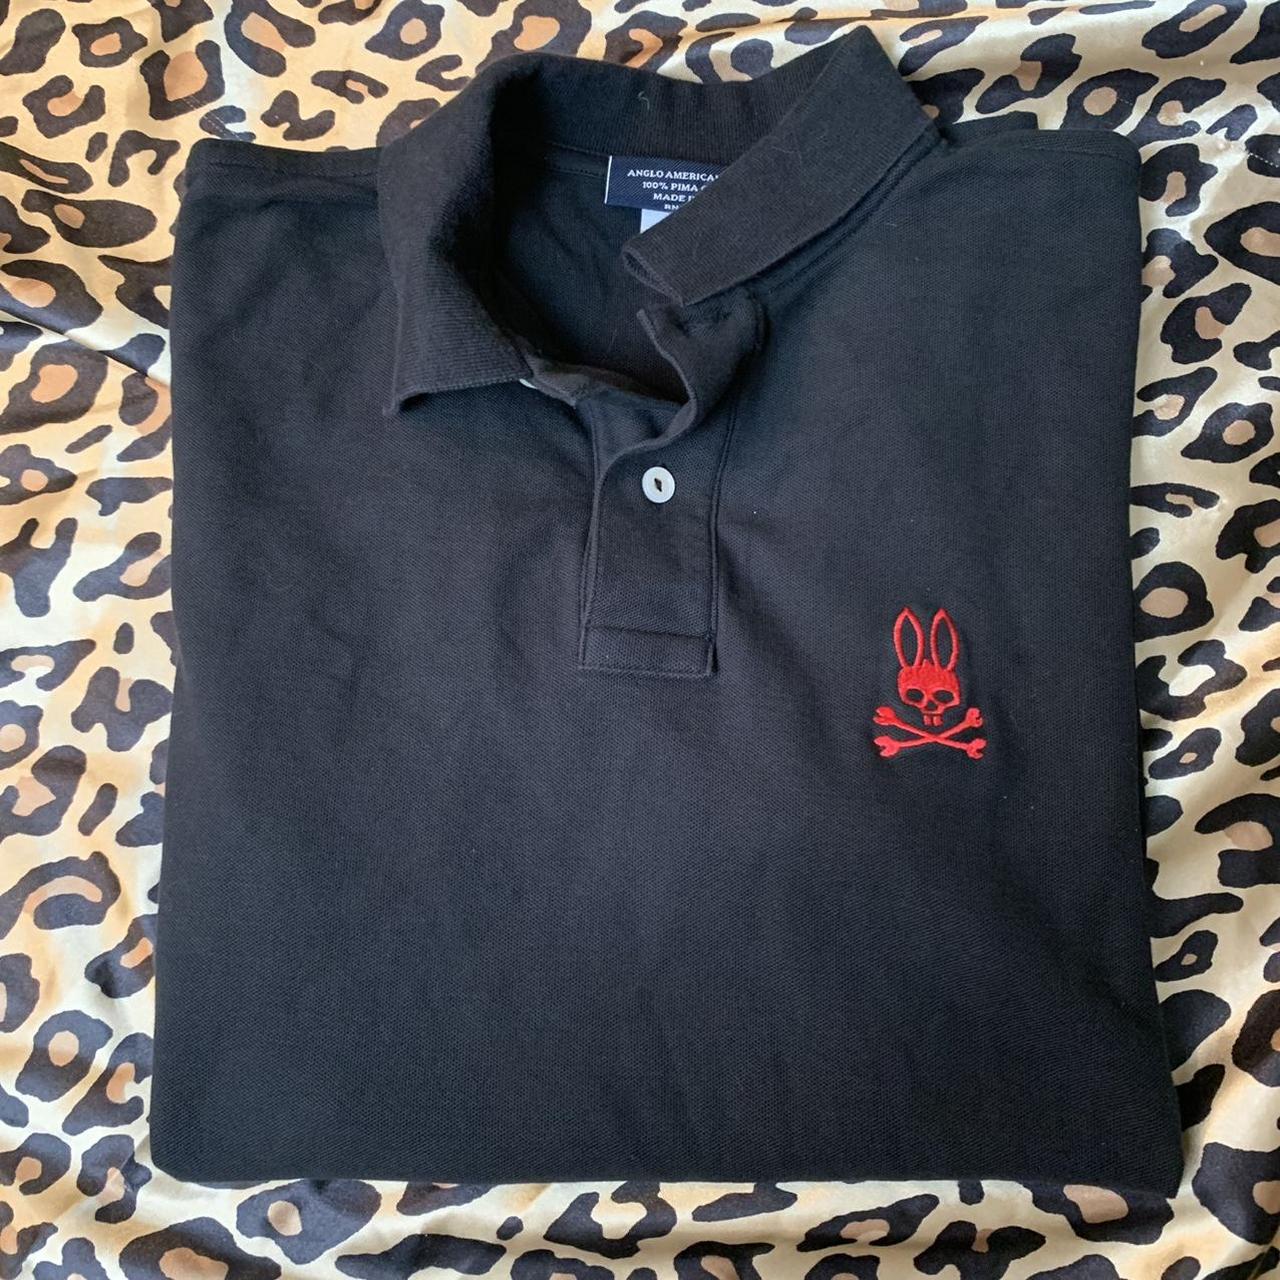 Psycho Bunny Men's Black and Red Polo-shirts (2)